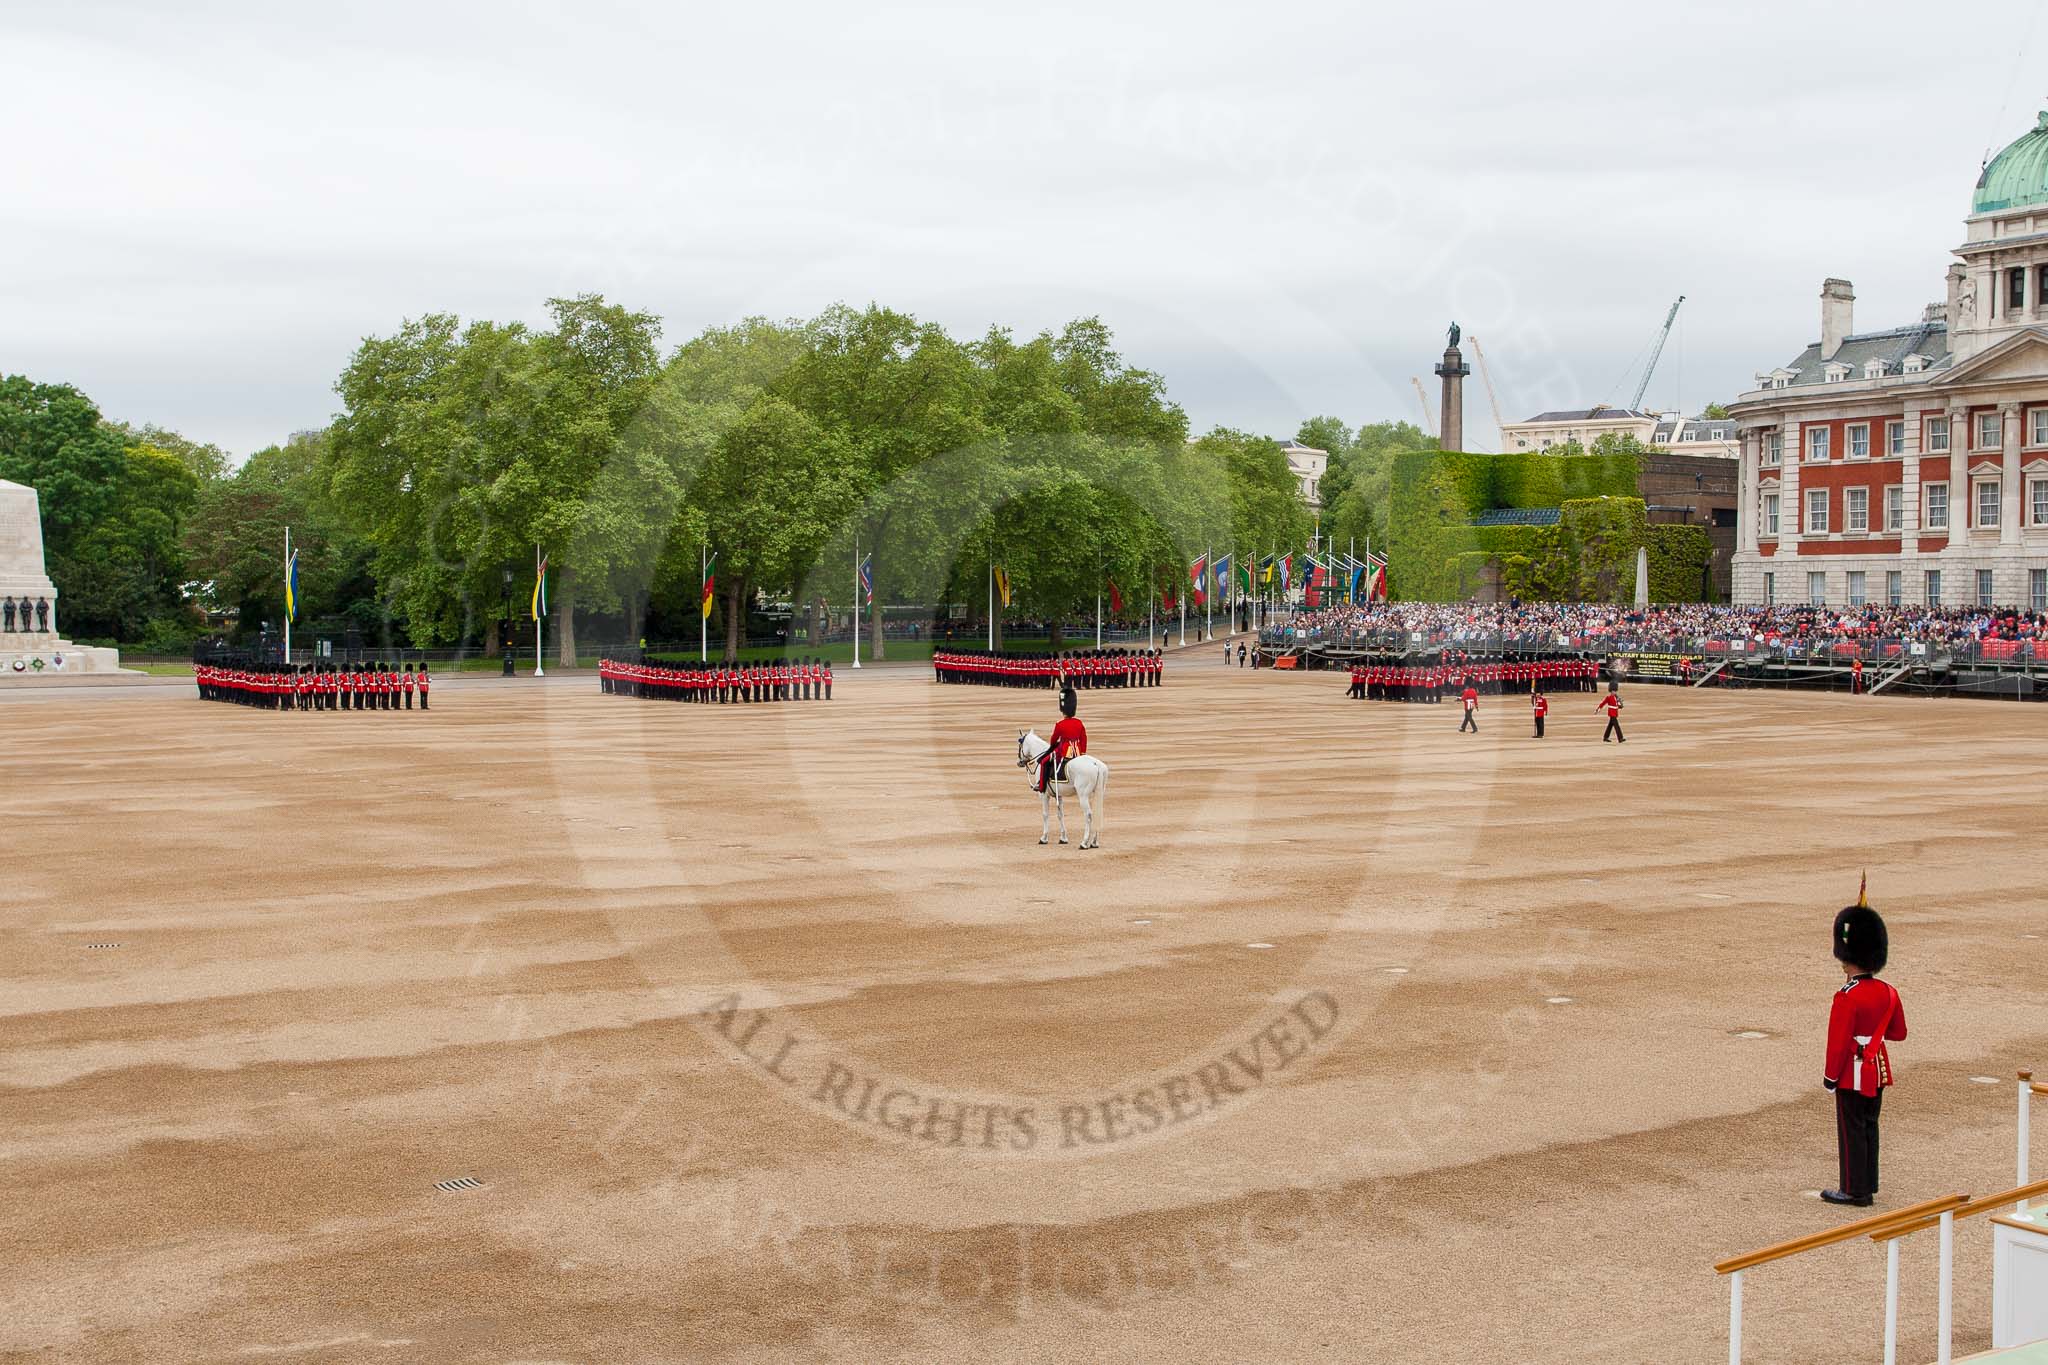 Major General's Review 2013: All six guards reposition to form a single, long, L-shaped line..
Horse Guards Parade, Westminster,
London SW1,

United Kingdom,
on 01 June 2013 at 10:35, image #147